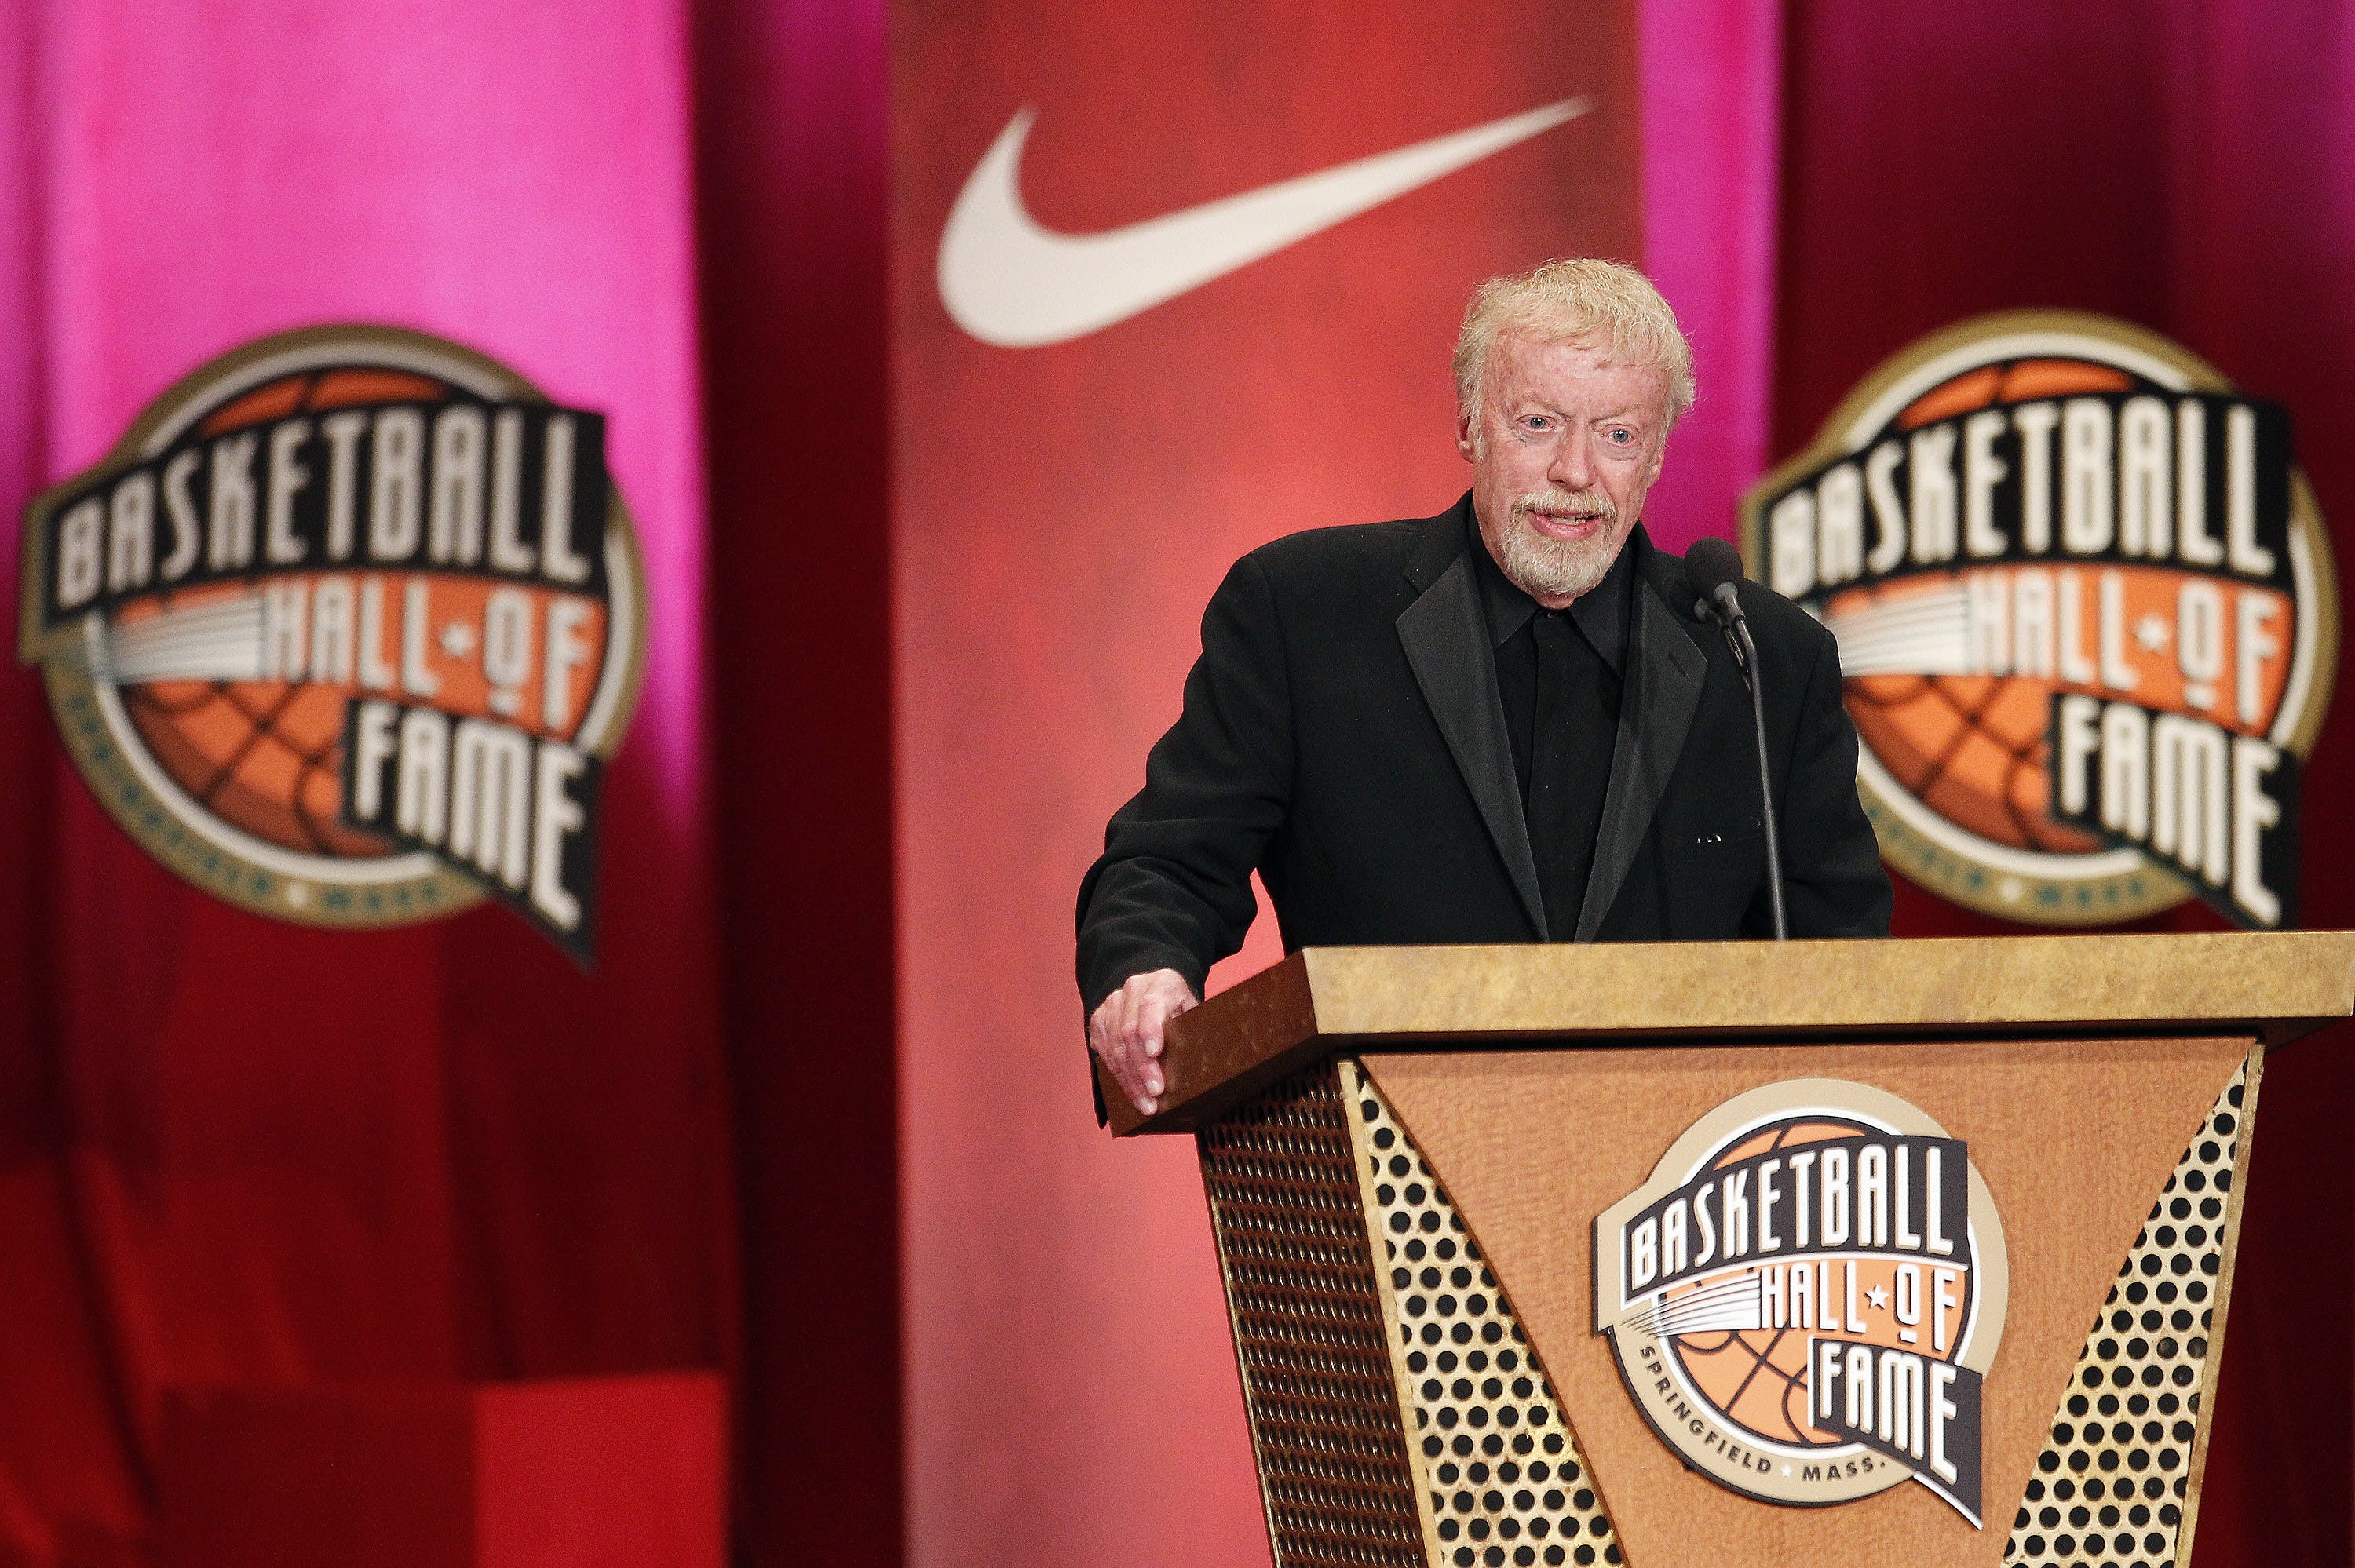 Nike co-founder Phil Knight. Photo Credit: Reuters/達志影像